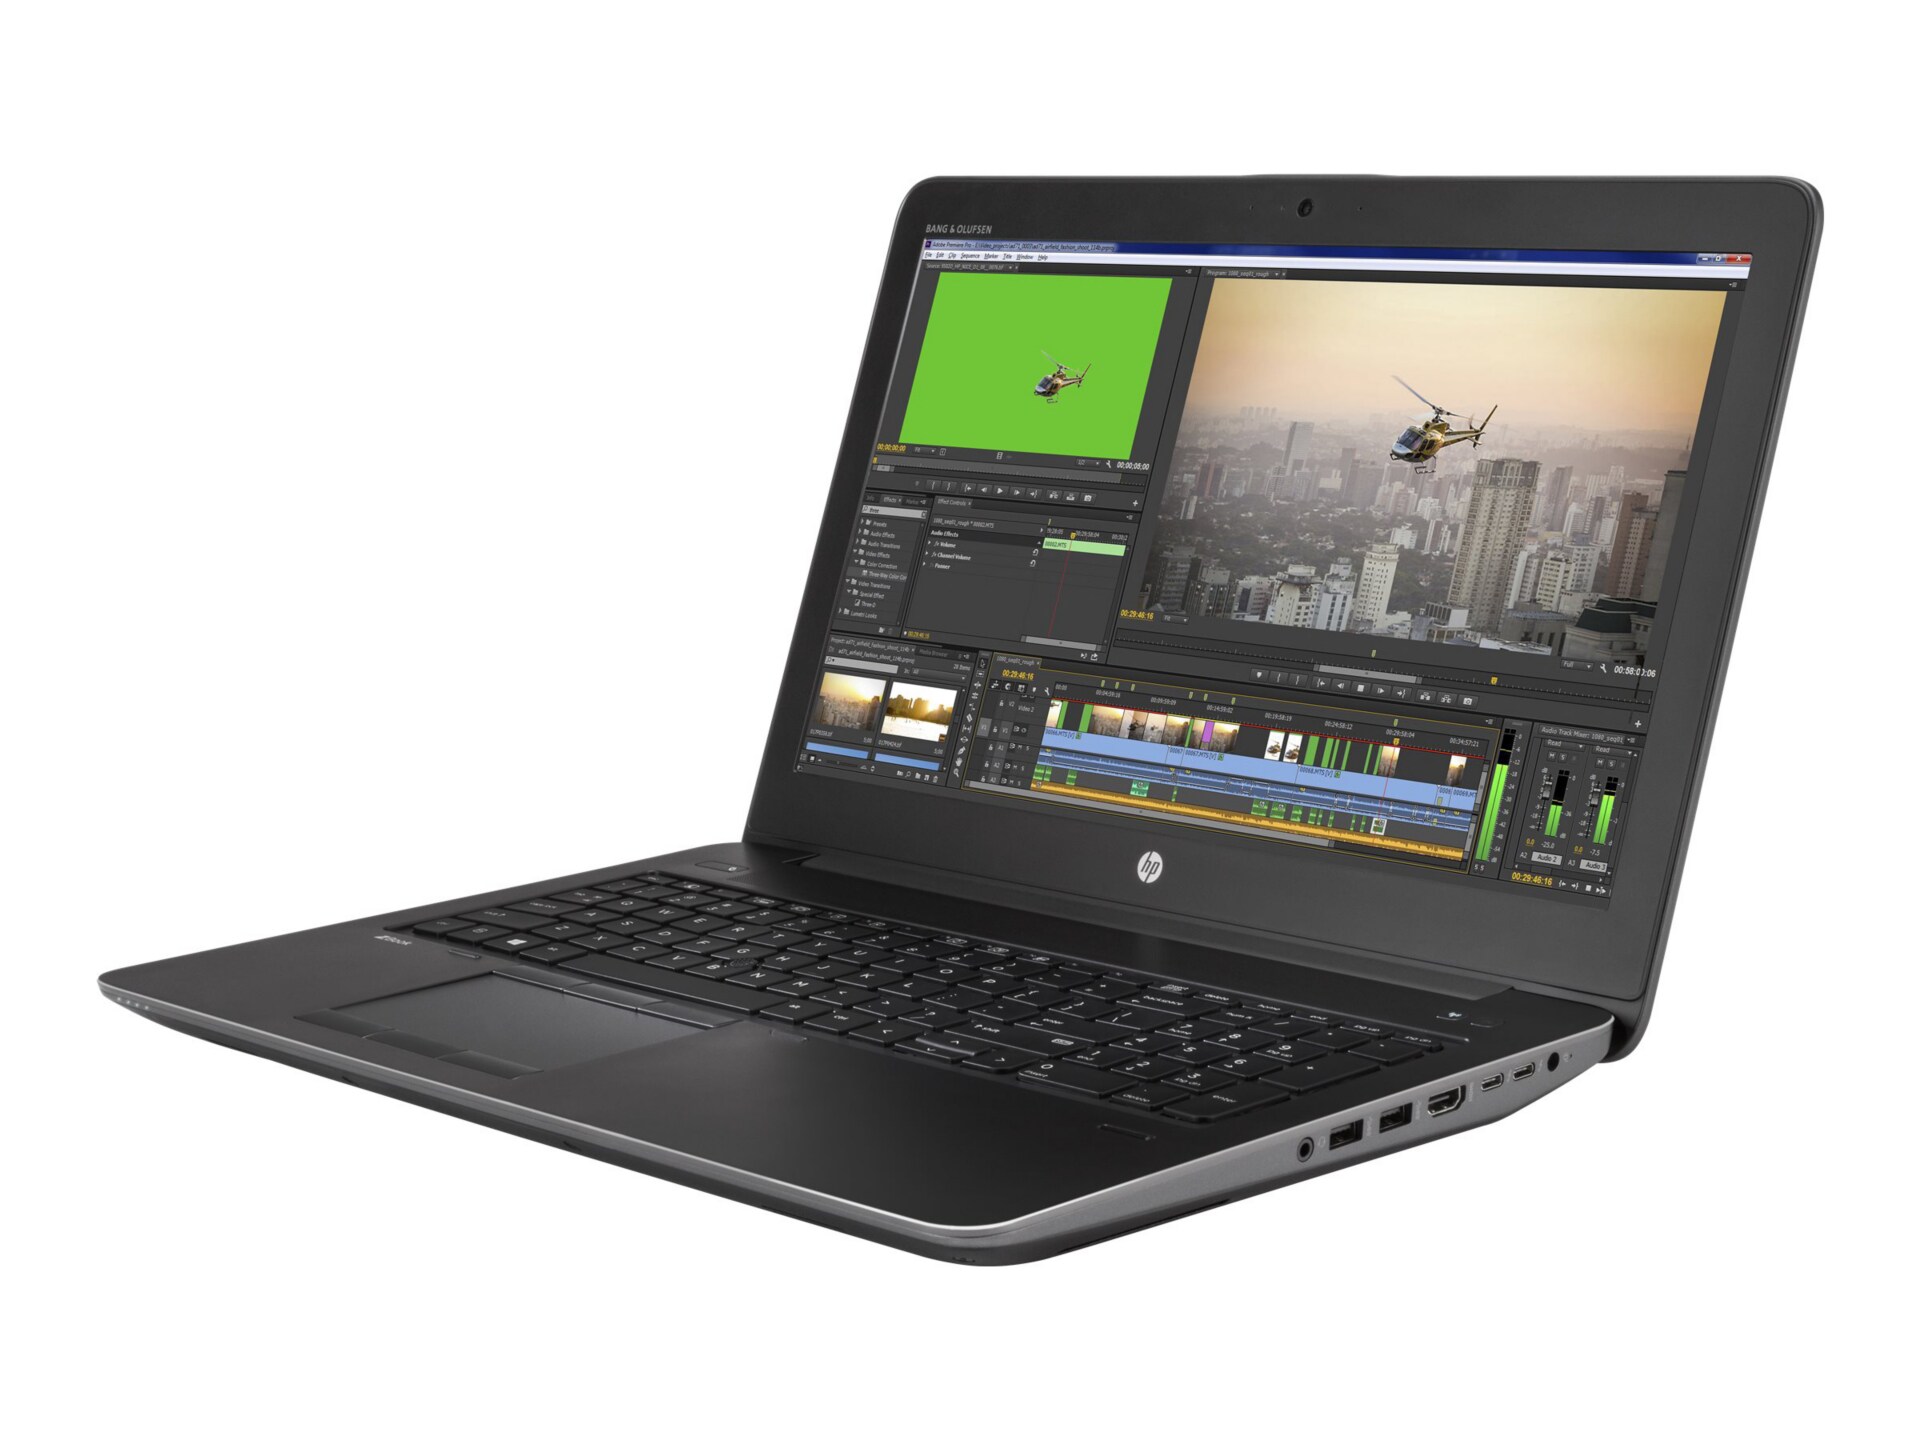 HP ZBook 15 G3 Mobile Workstation - 15.6" - Core i7 6820HQ - 16 GB RAM - 512 GB SSD - US